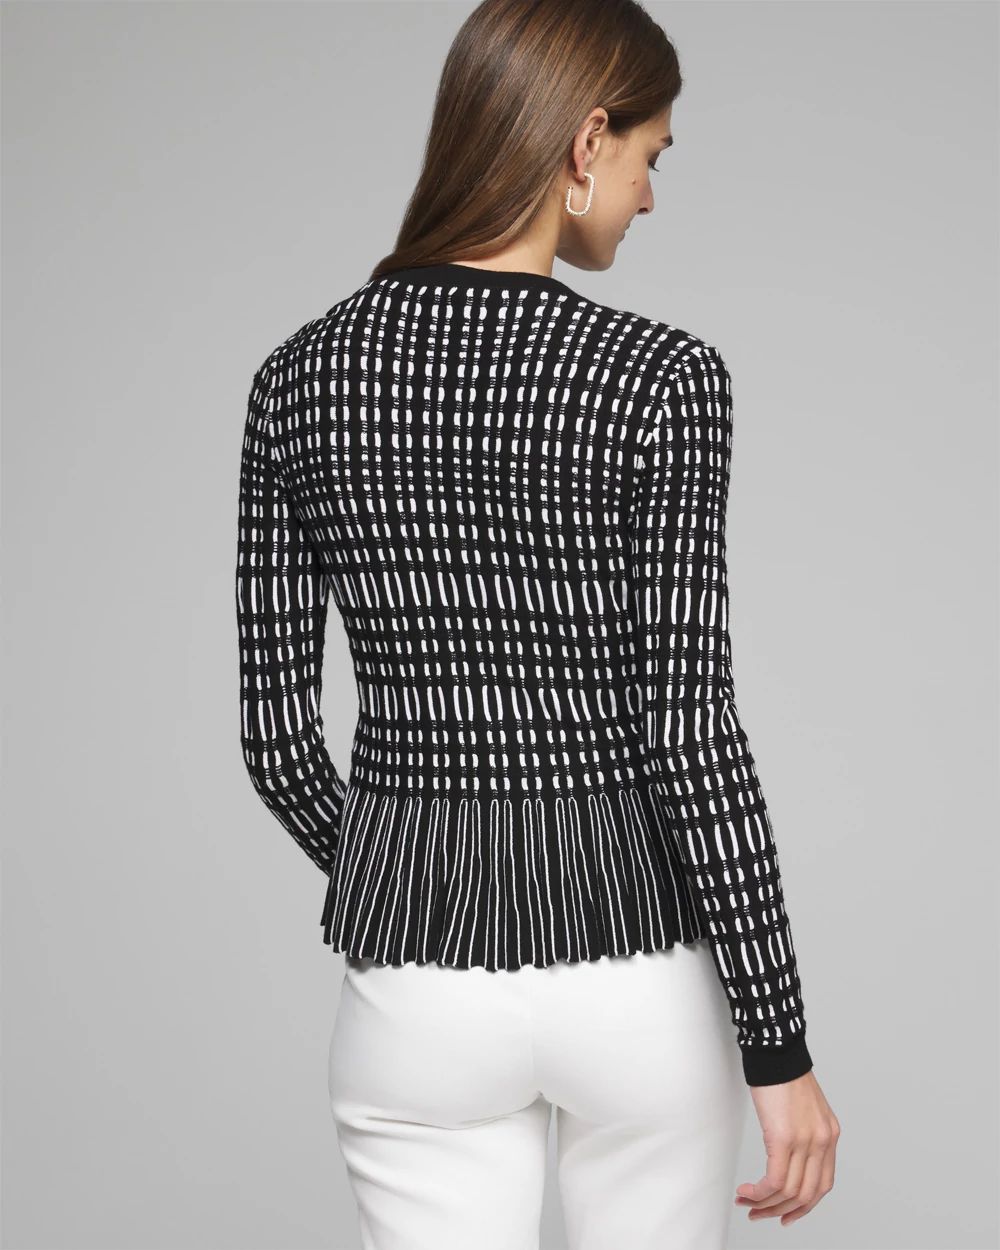 Outlet WHBM Novelty Peplum Cardigan click to view larger image.